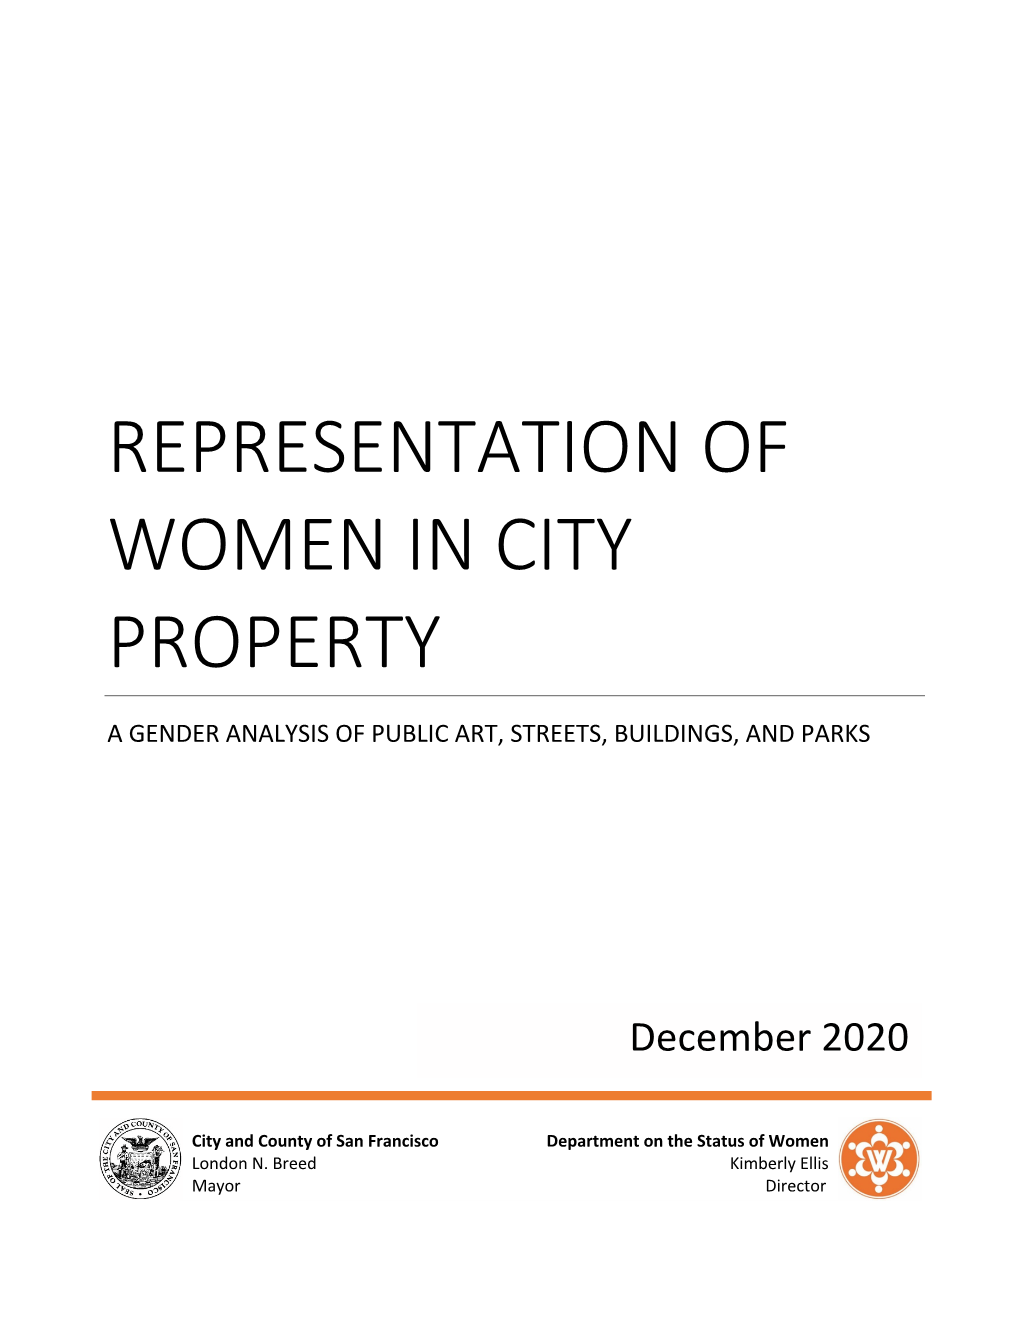 Representation of Women in City Property 2020